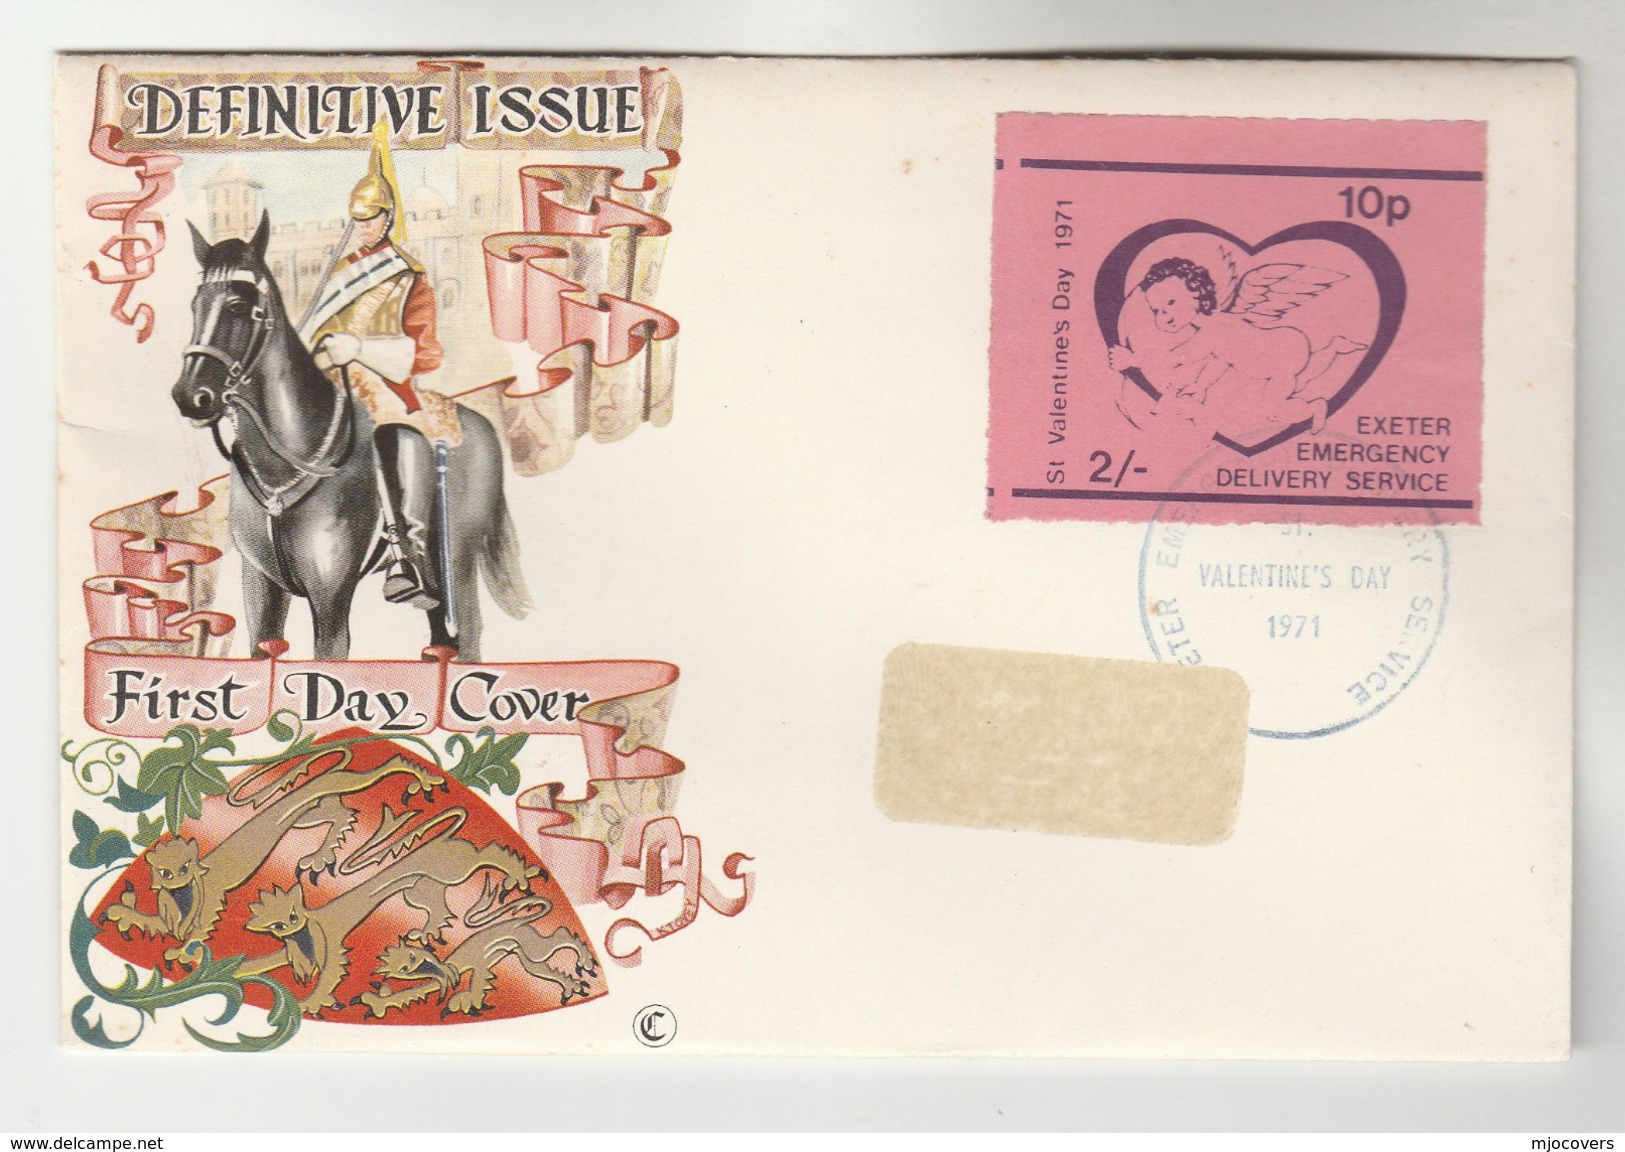 1971 Exeter GB POSTAL STRIKE COVER  2/- EXETER EMERGENCY DELIVERY SERVICE VALENTINES Label Great Britain - Cinderellas